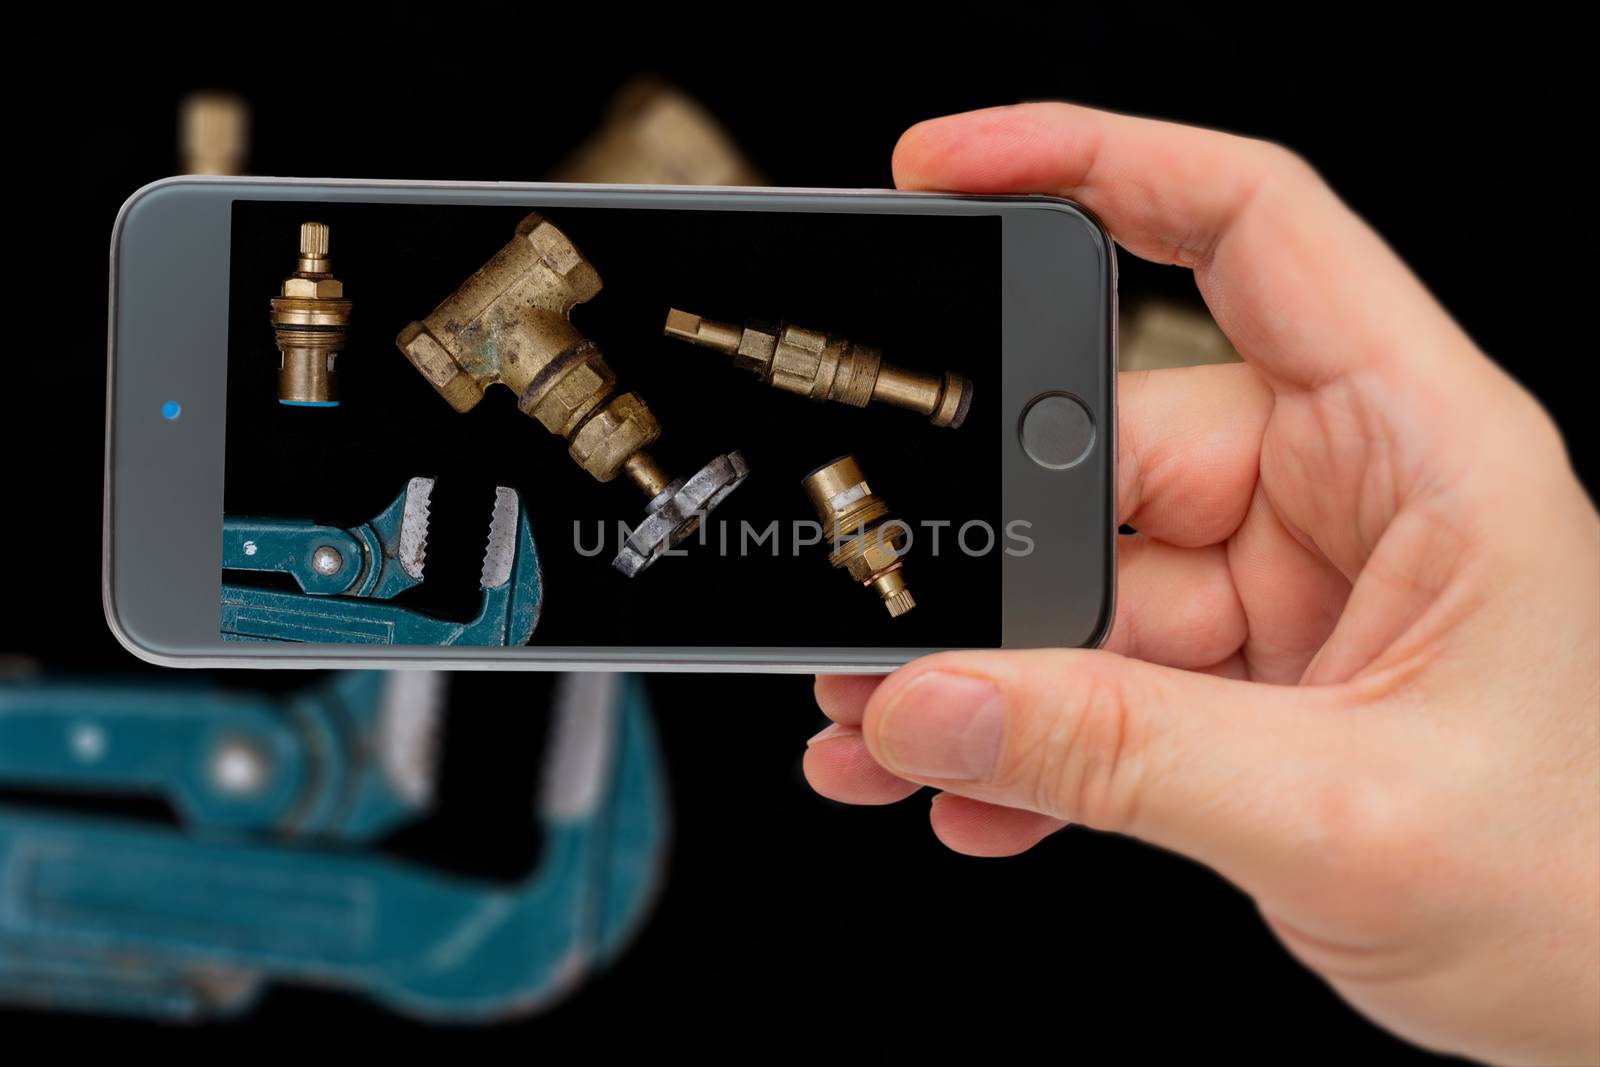 Plumbing tools on black background. Faucets, valve, pipe wrench to repair water supply system. Plumber tools on smartphone screen.